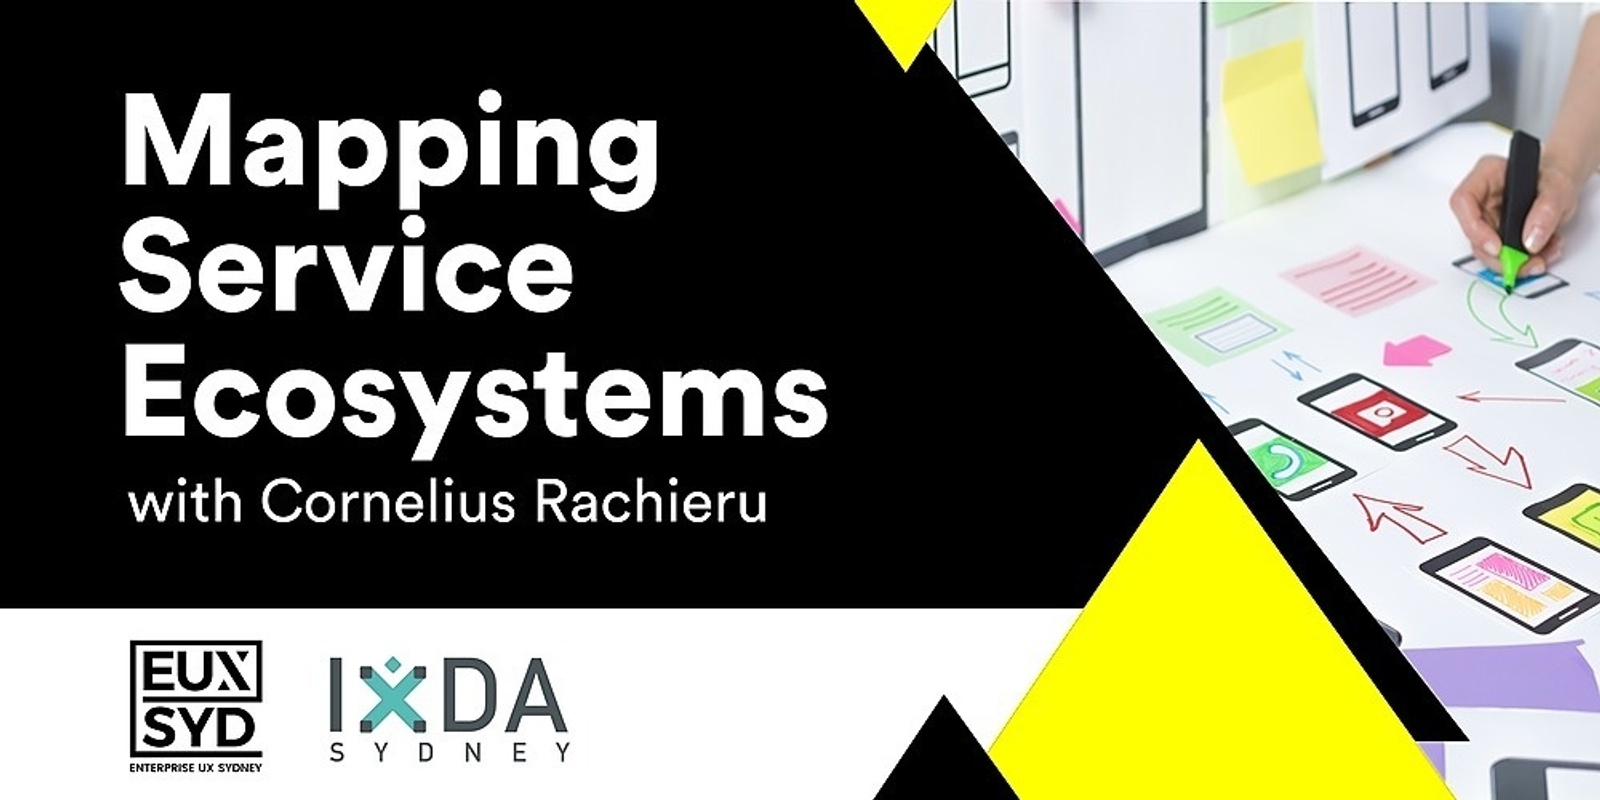 Banner image for Mapping Service Ecosystems - Cornelius Rachieru